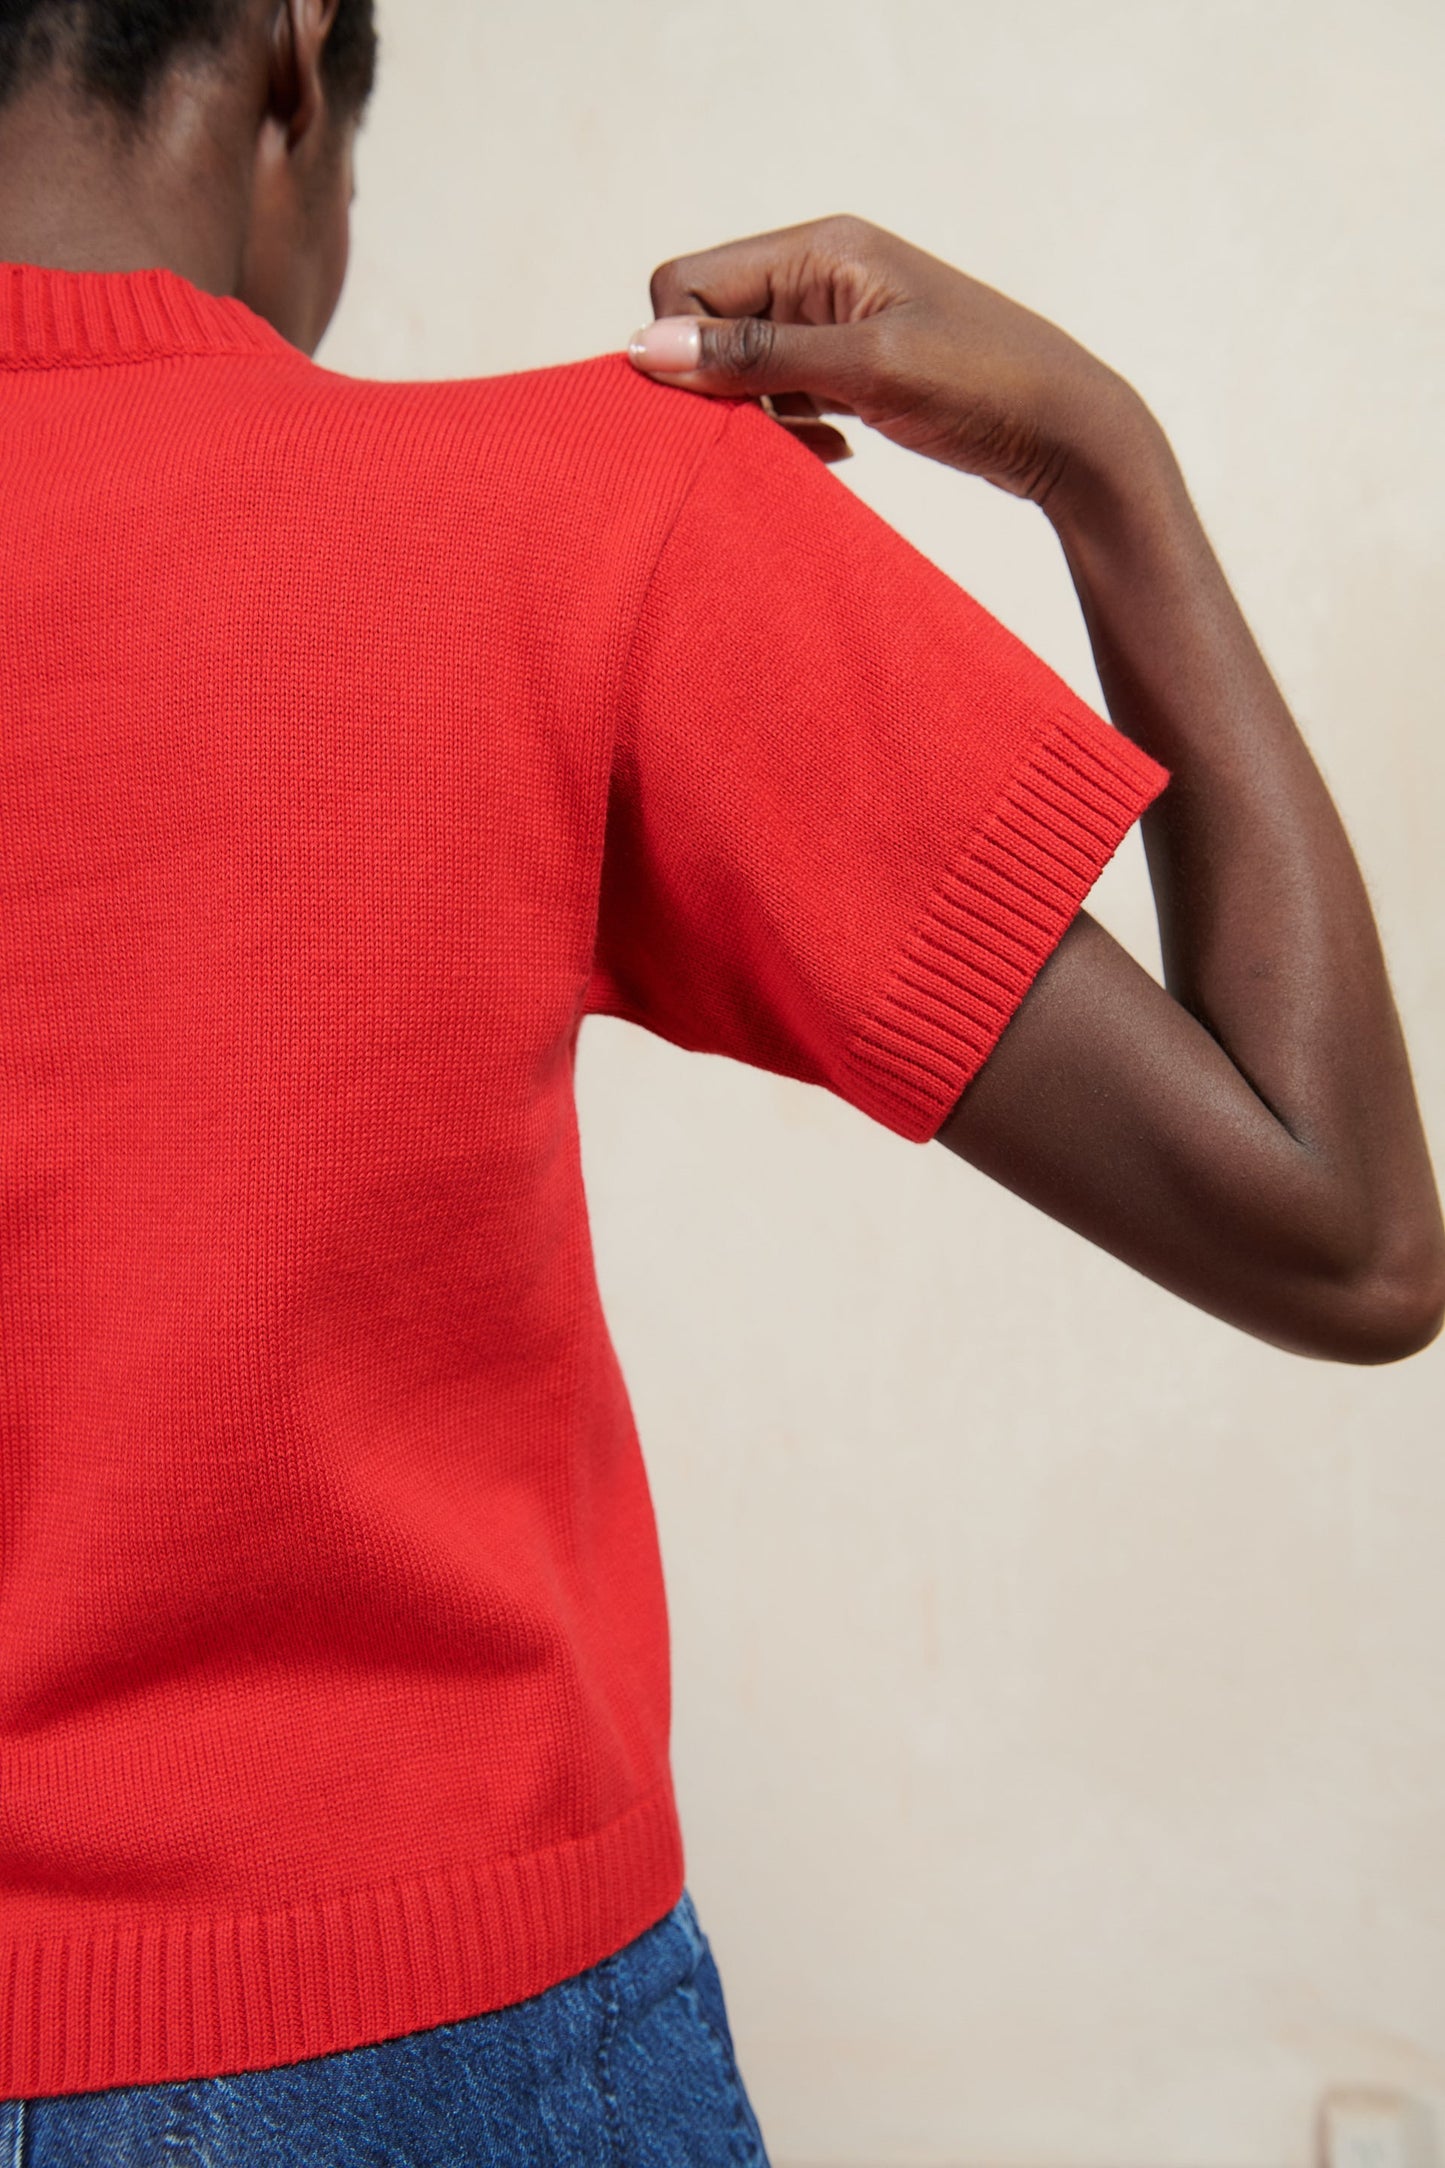 Maria Stanley Knit Tee in Piquillo (red)